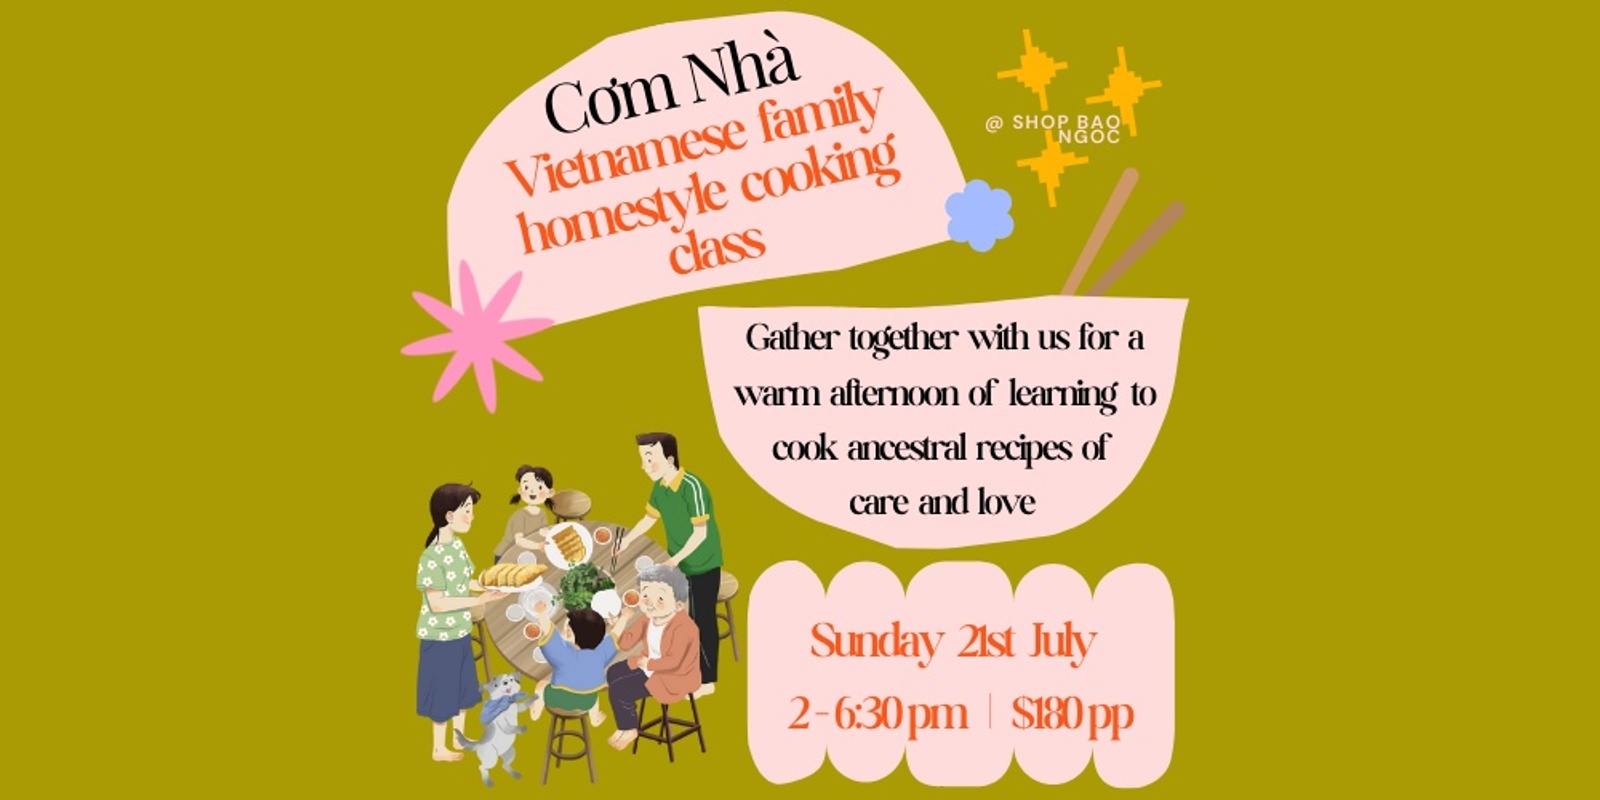 Banner image for Cơm Nhà - Vietnamese Family Home Style Cooking Class